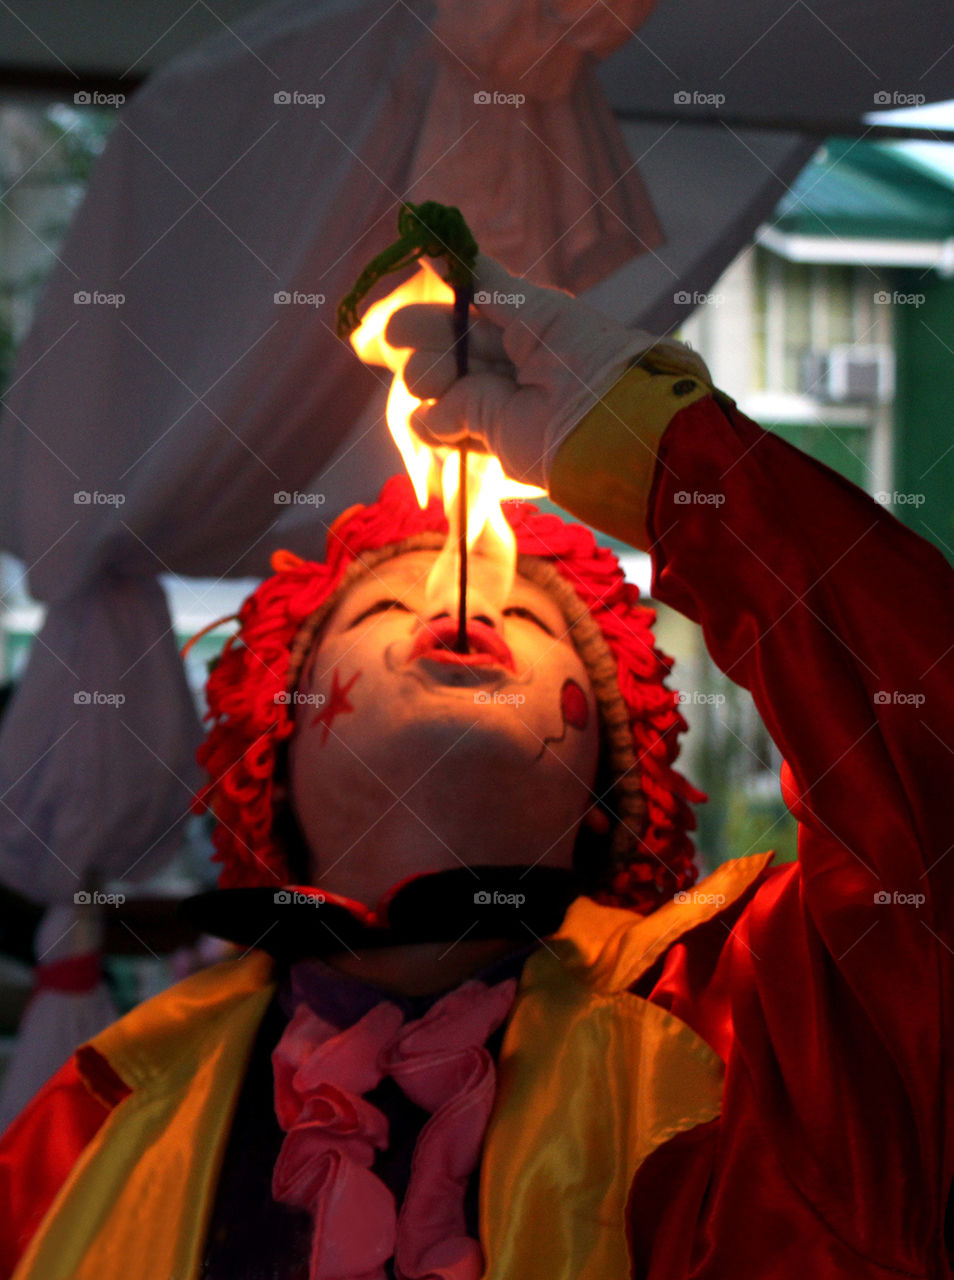 Jade, the clown fire eater on his performance